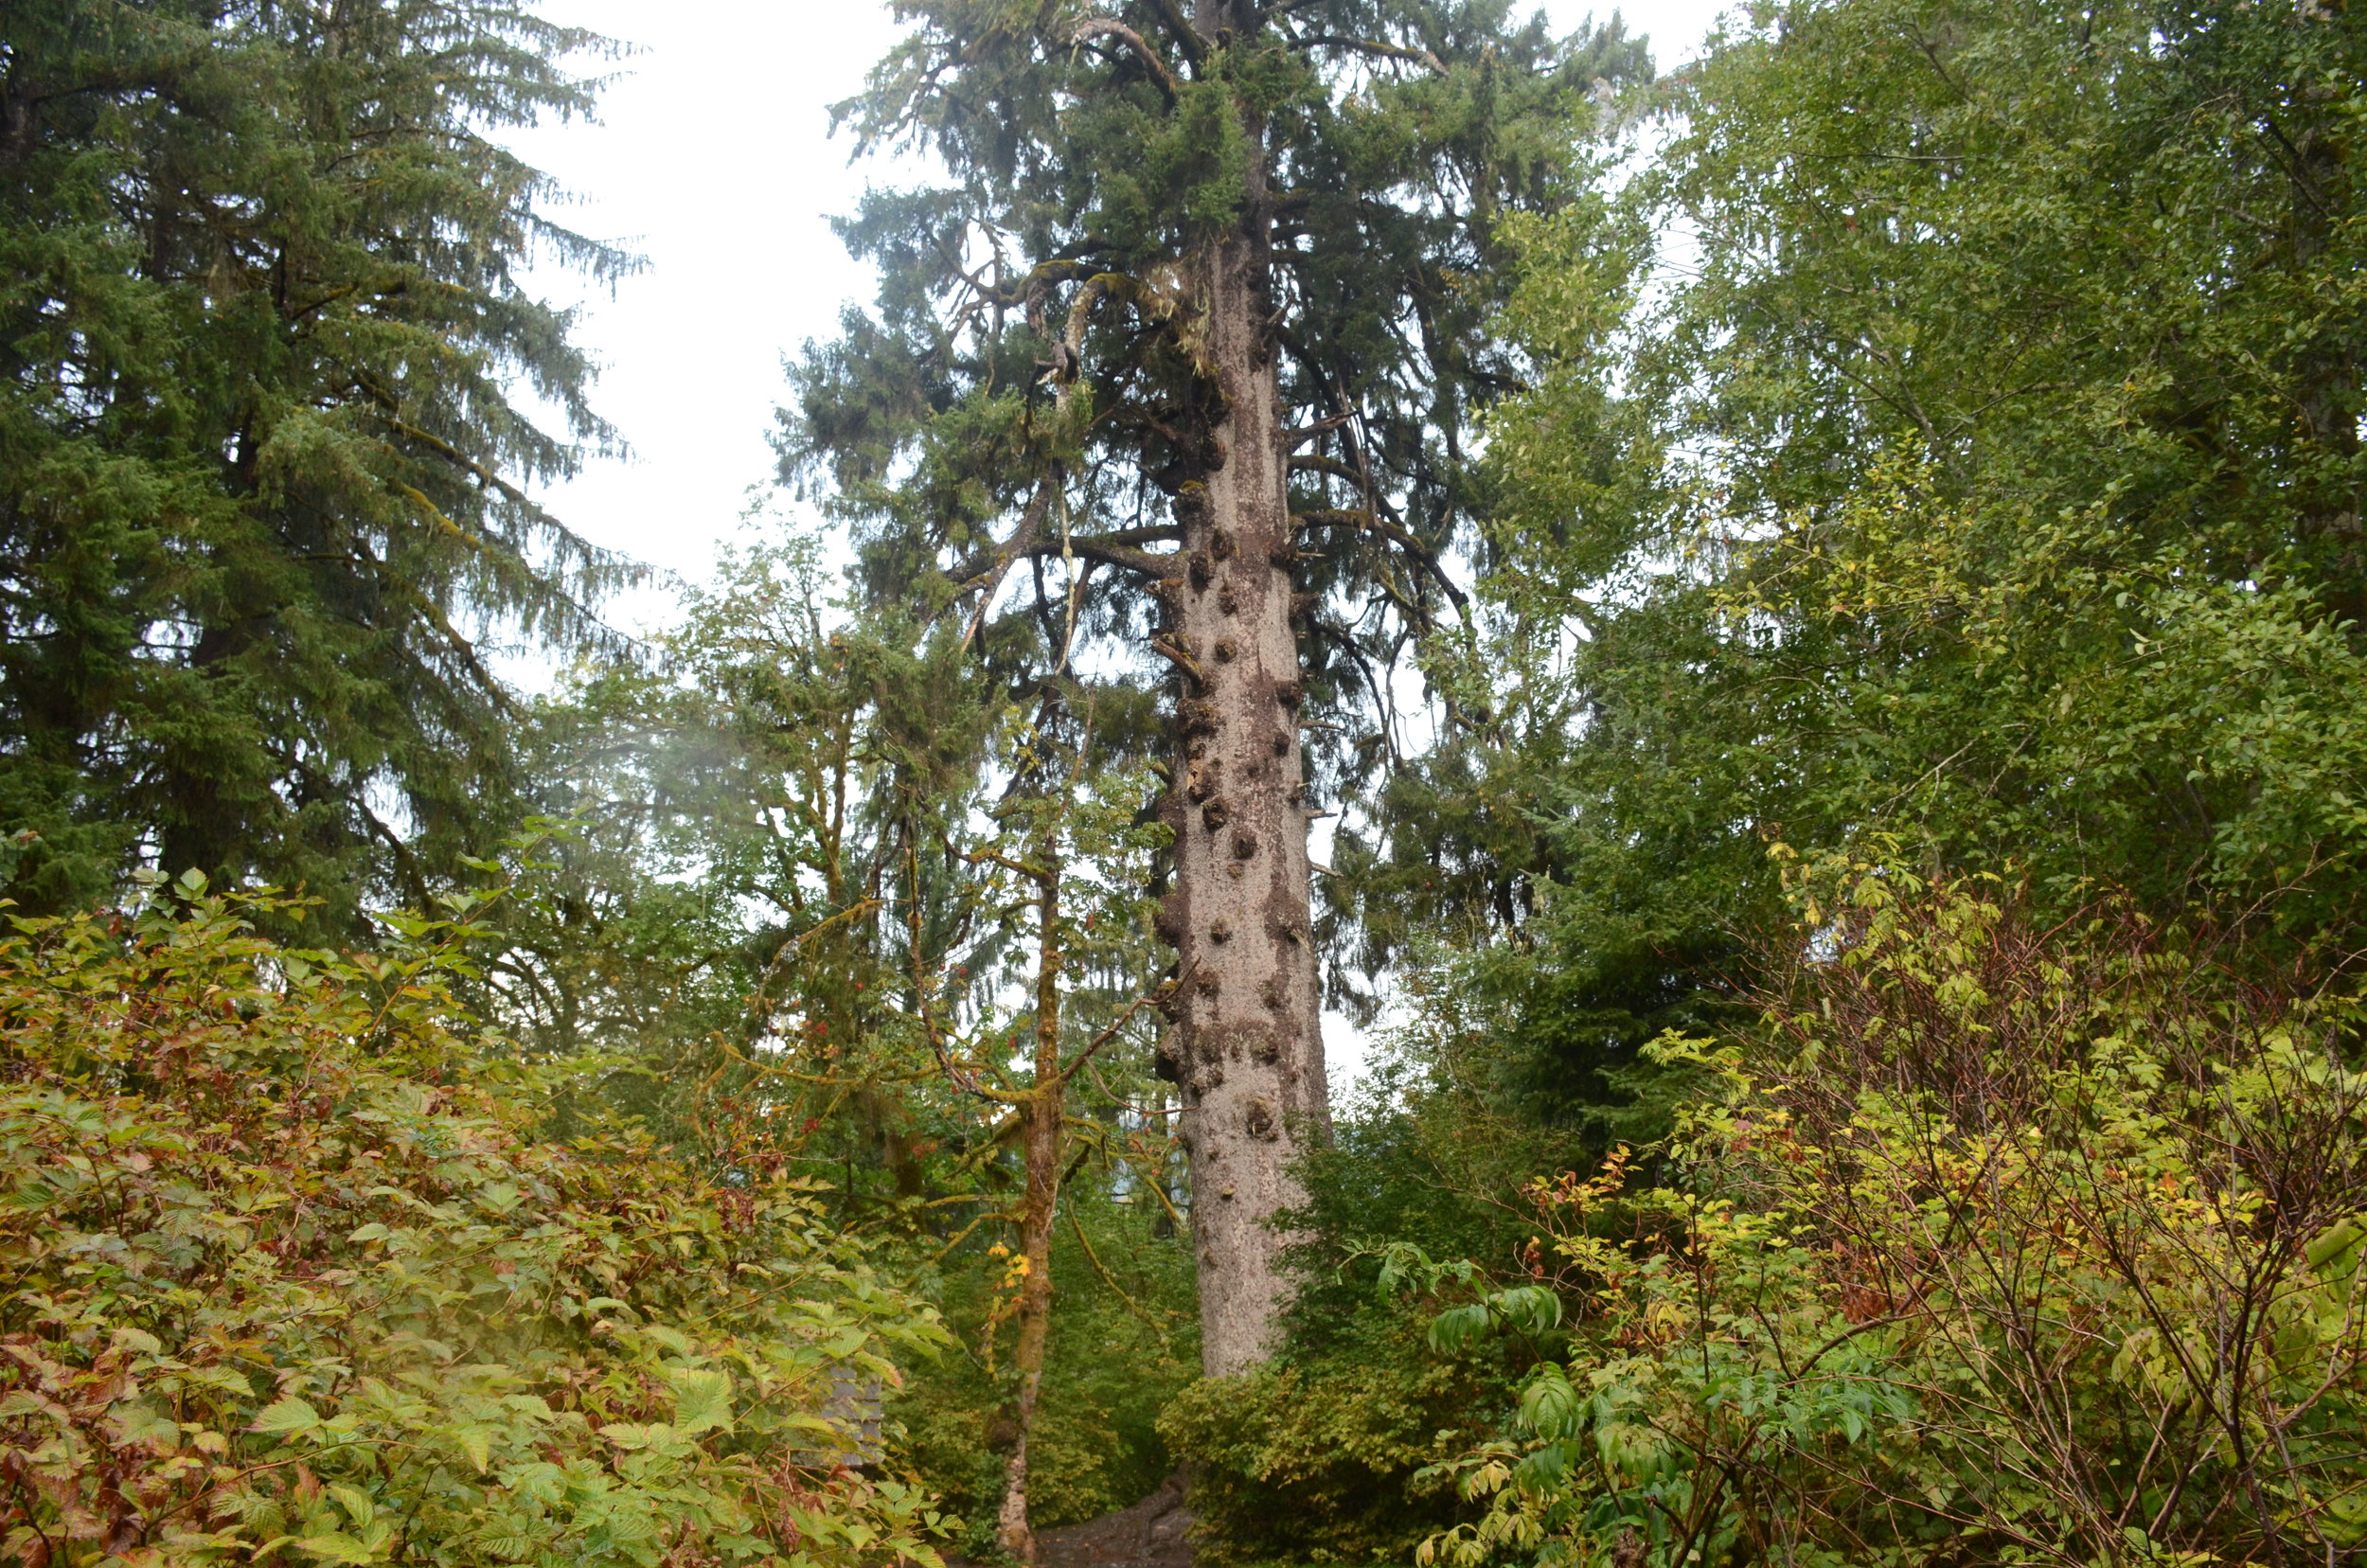  The world’s largest spruce stands by Lake Quinault at the edge of Olympic National Park. 